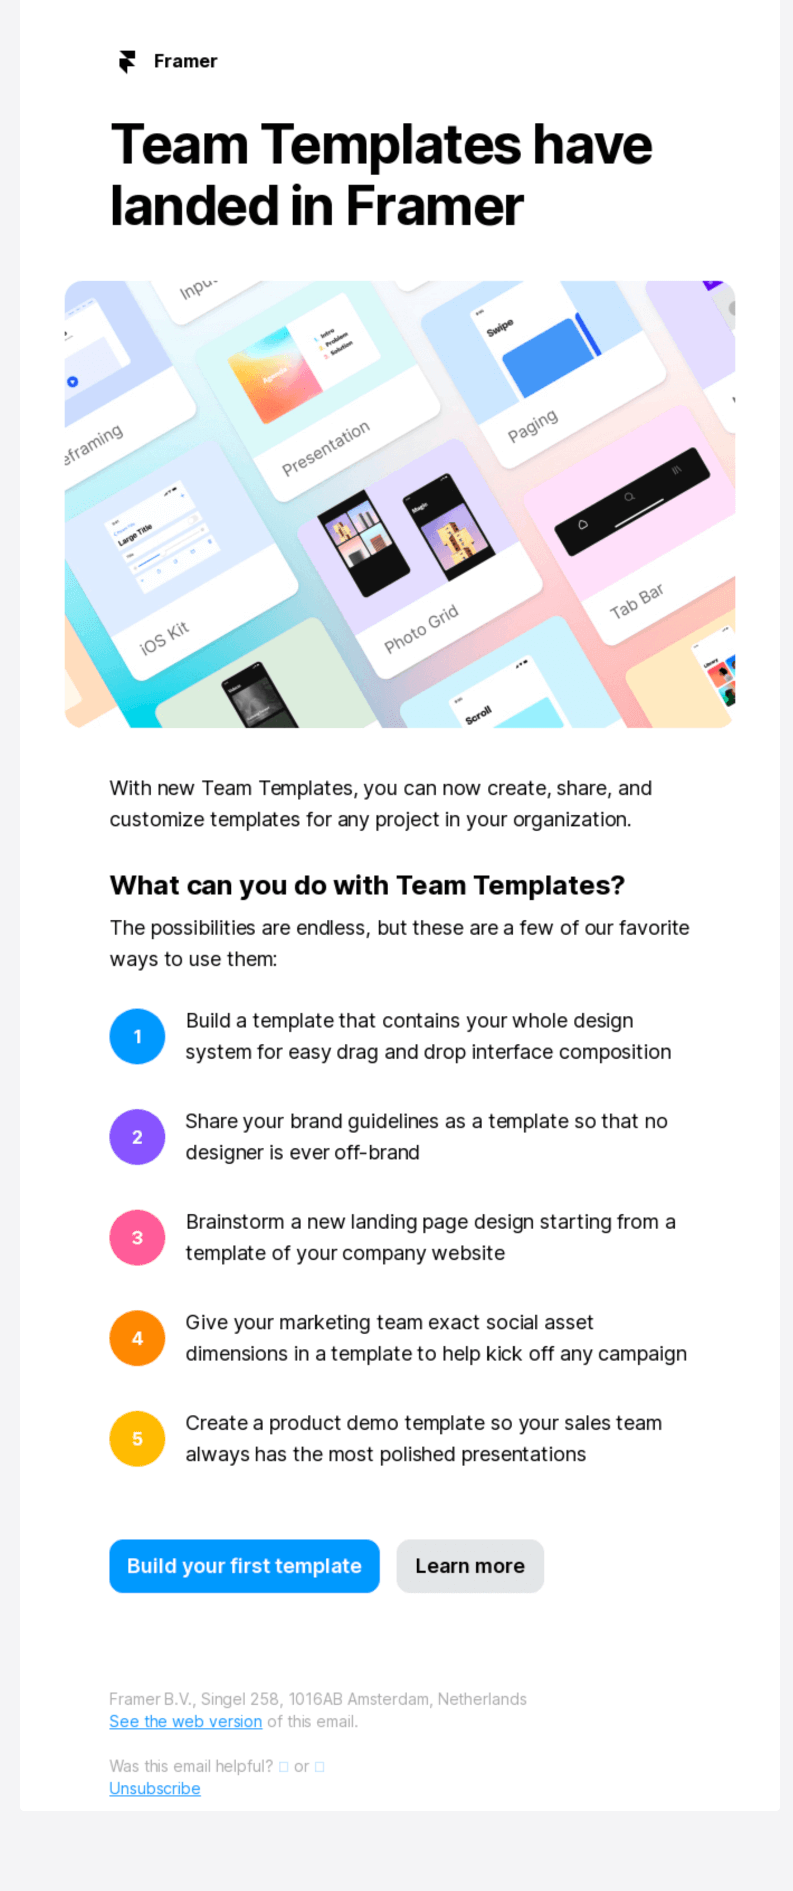 Announcement email from Framer